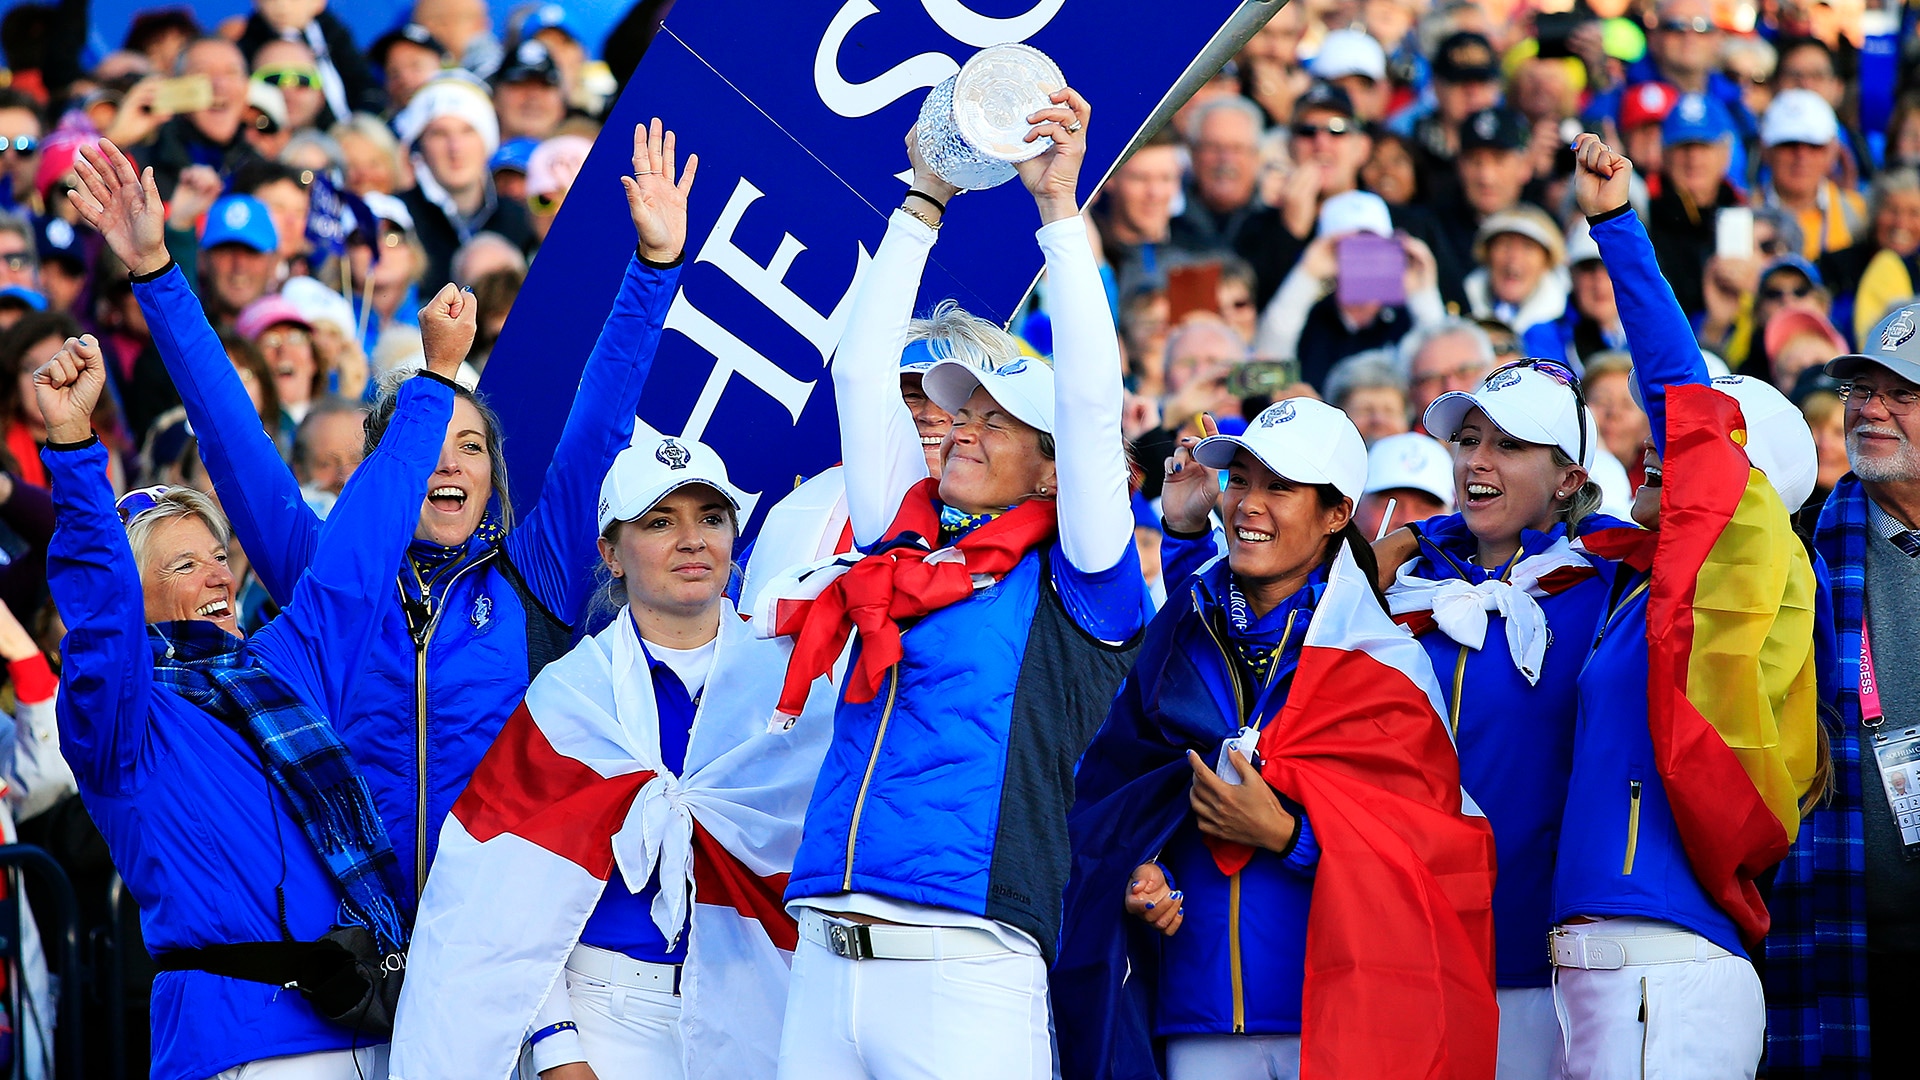 Solheim Cup to change to even years beginning in 2024